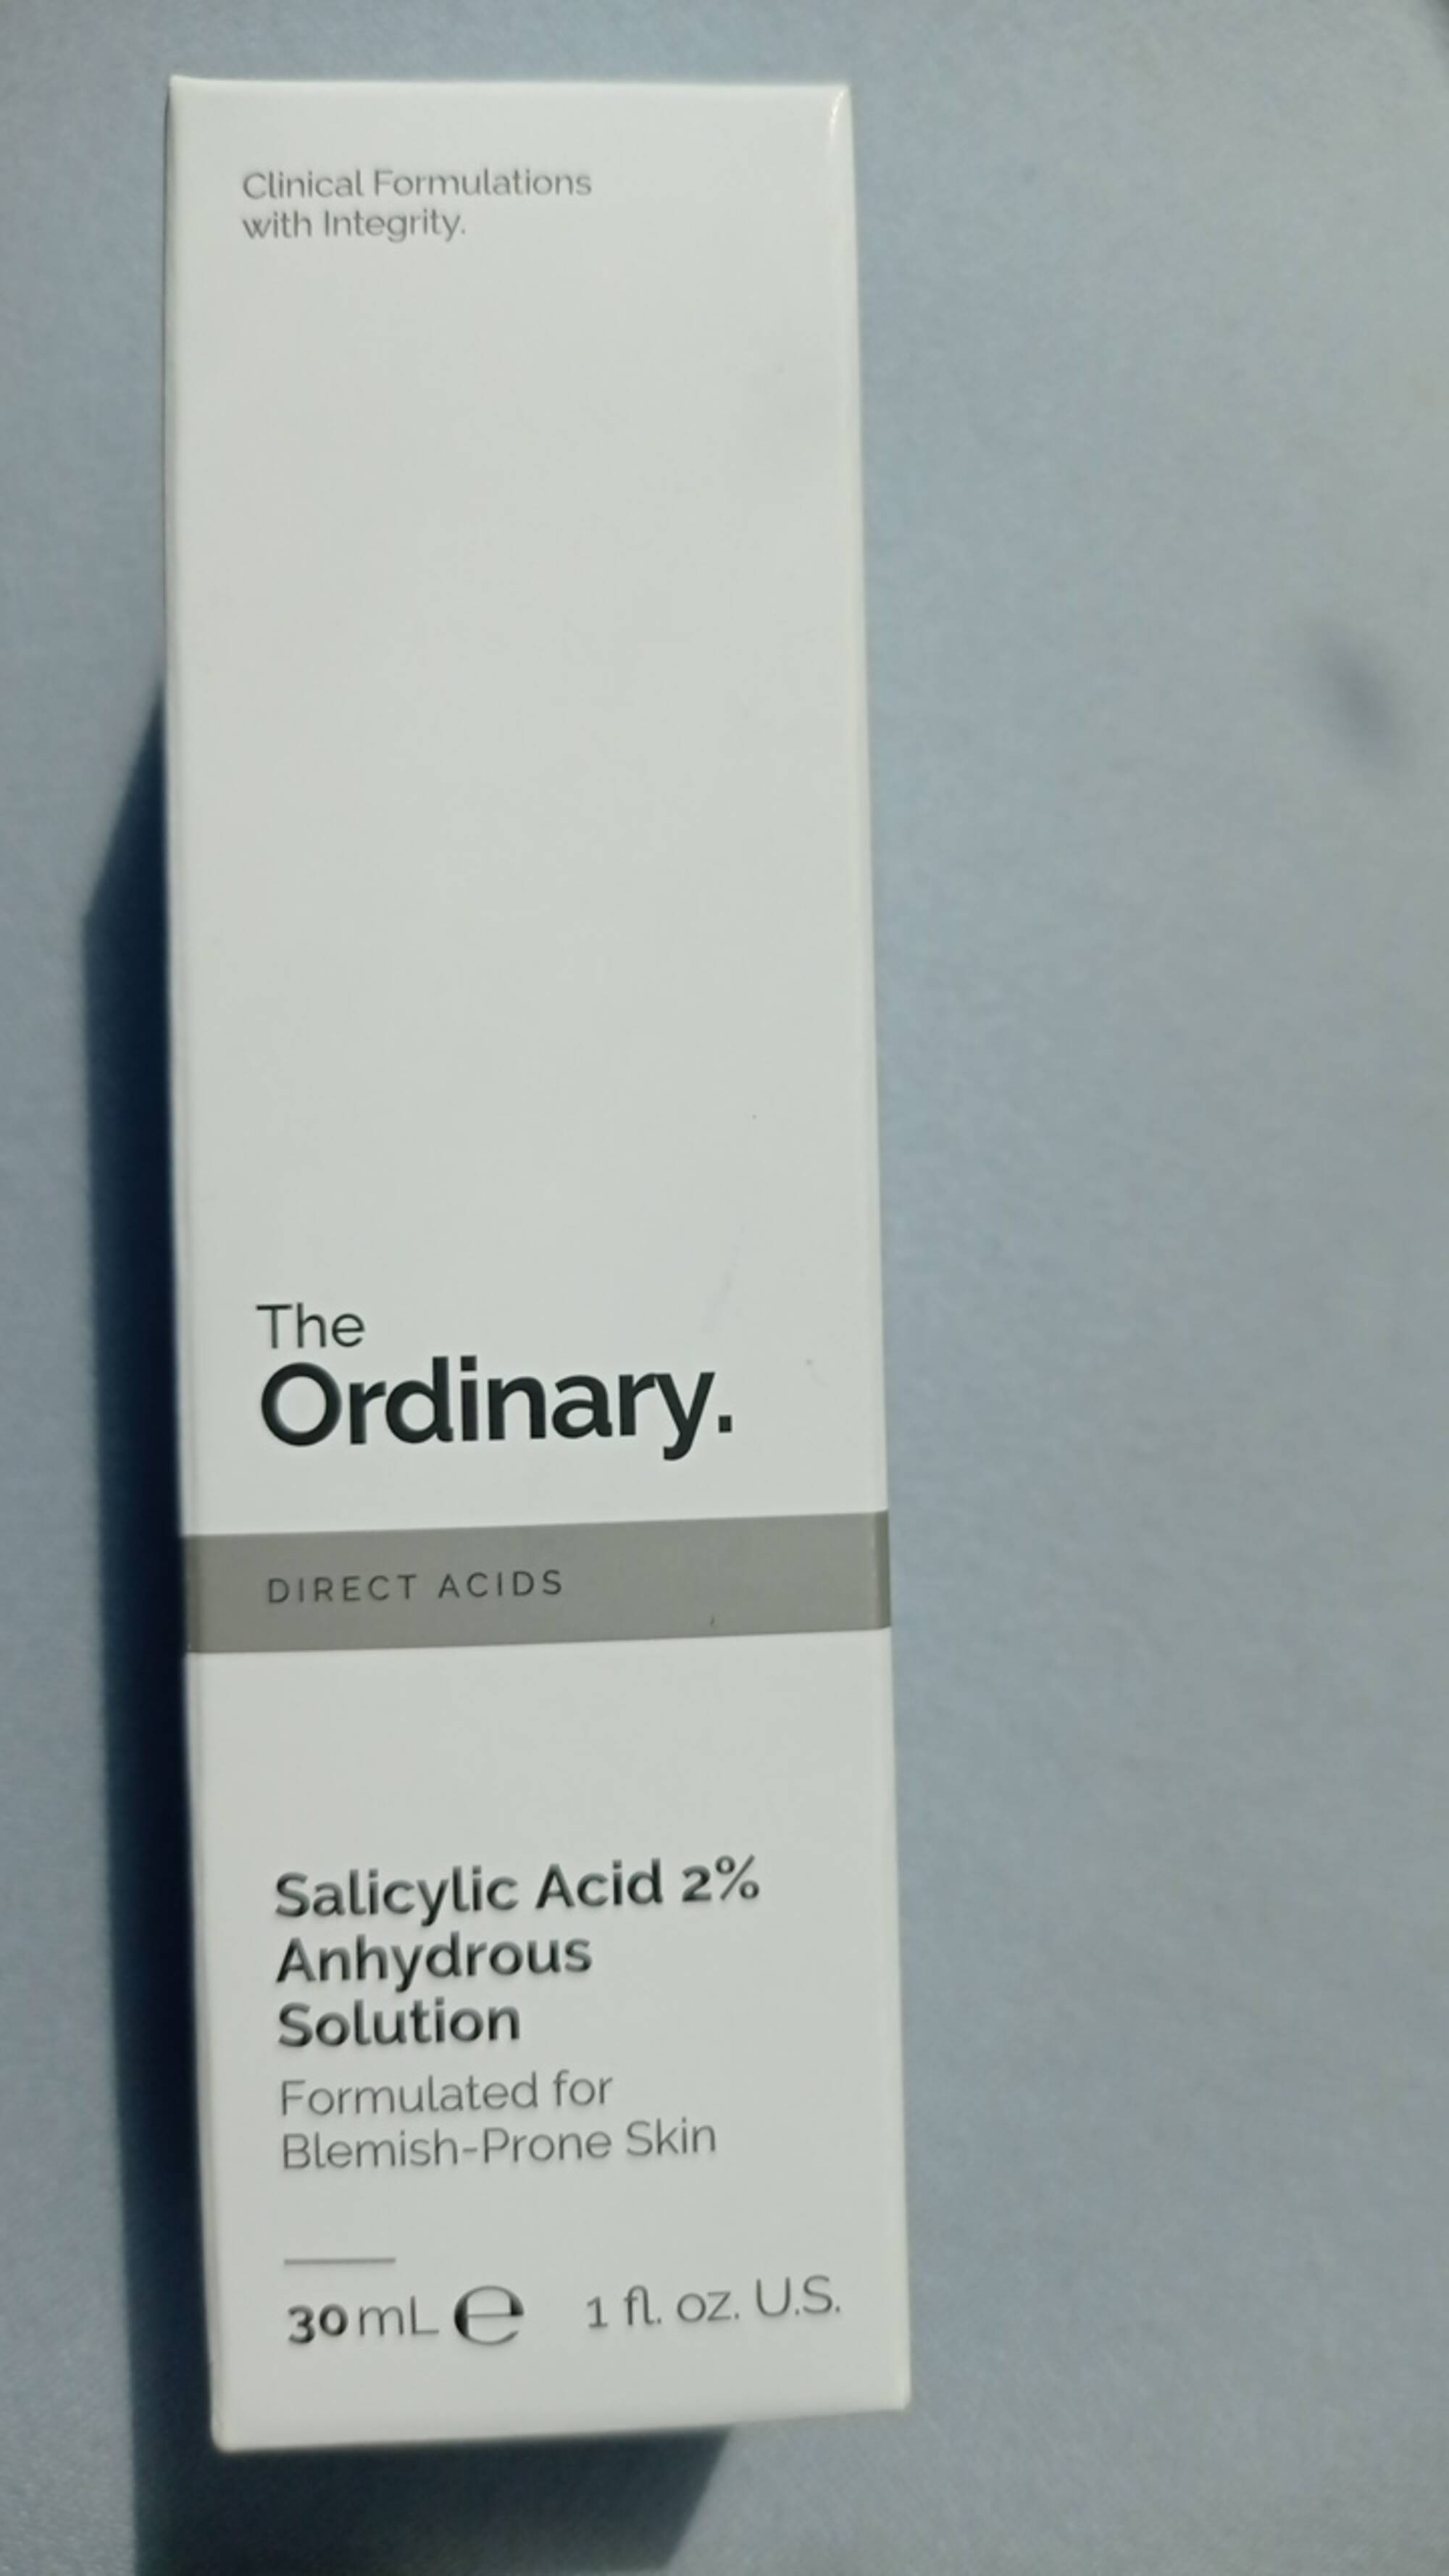 THE ORDINARY - Salicylic acid 2% anhydrous solution 